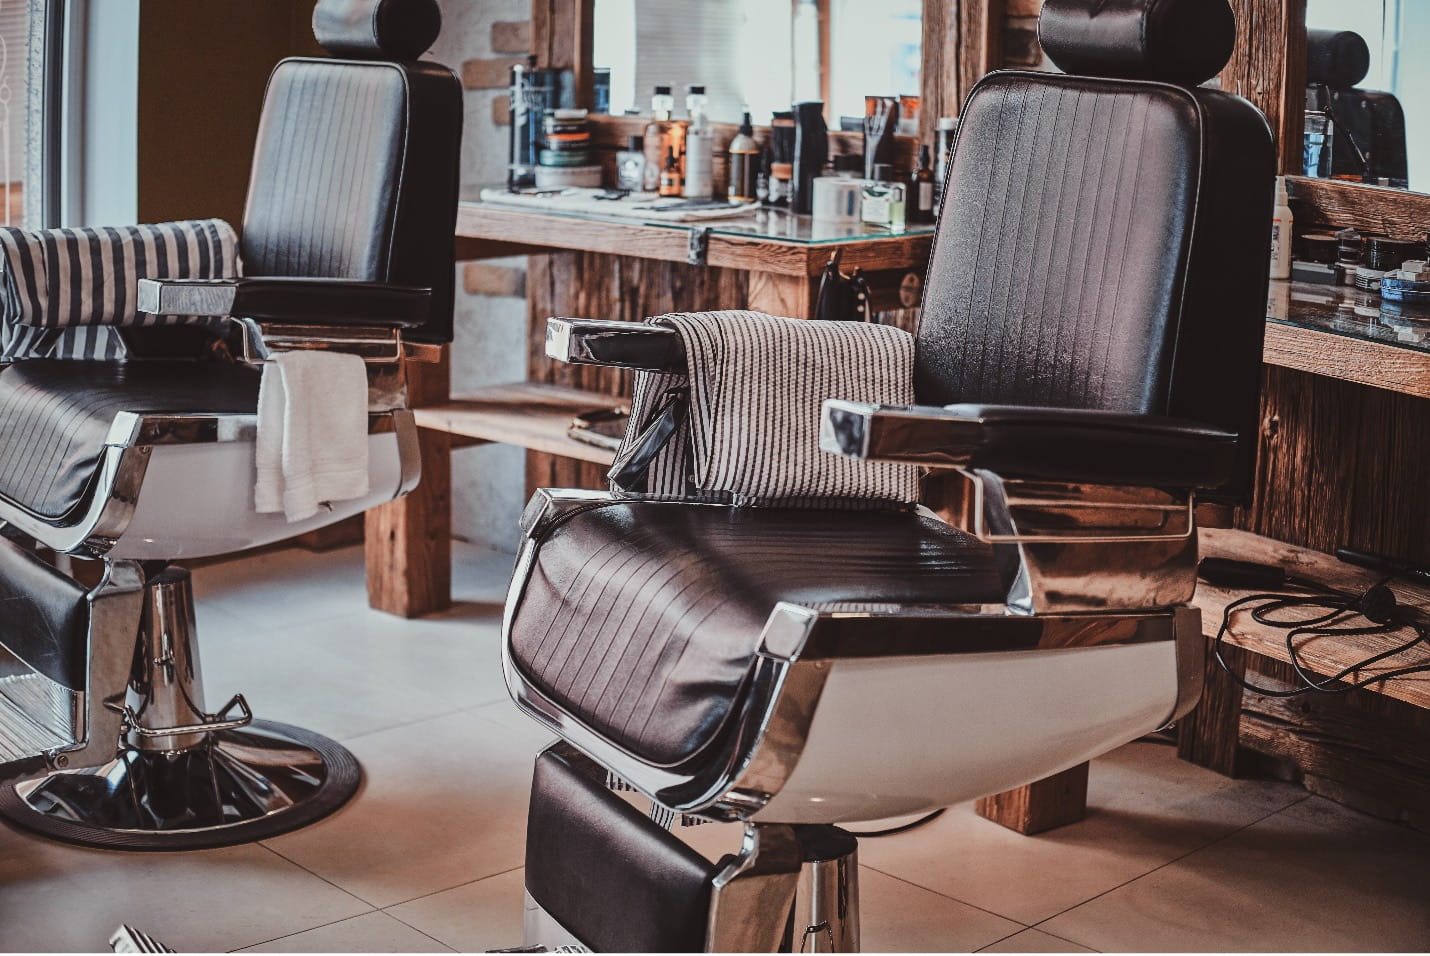 Empty chairs in a barbershop.